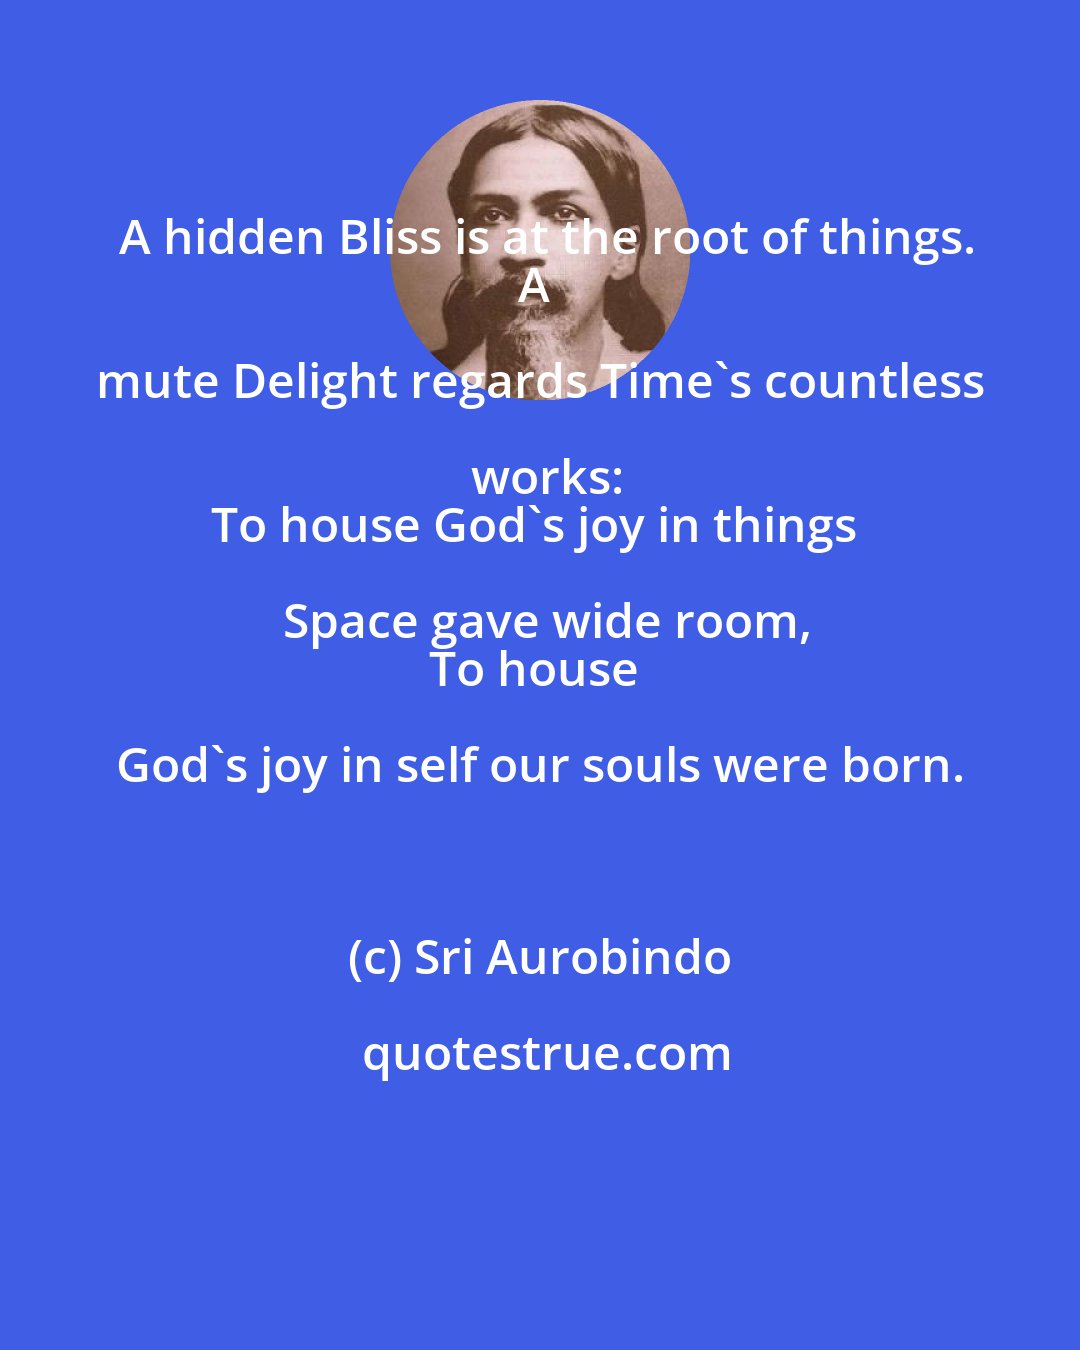 Sri Aurobindo: A hidden Bliss is at the root of things.
A mute Delight regards Time's countless works:
To house God's joy in things Space gave wide room,
To house God's joy in self our souls were born.